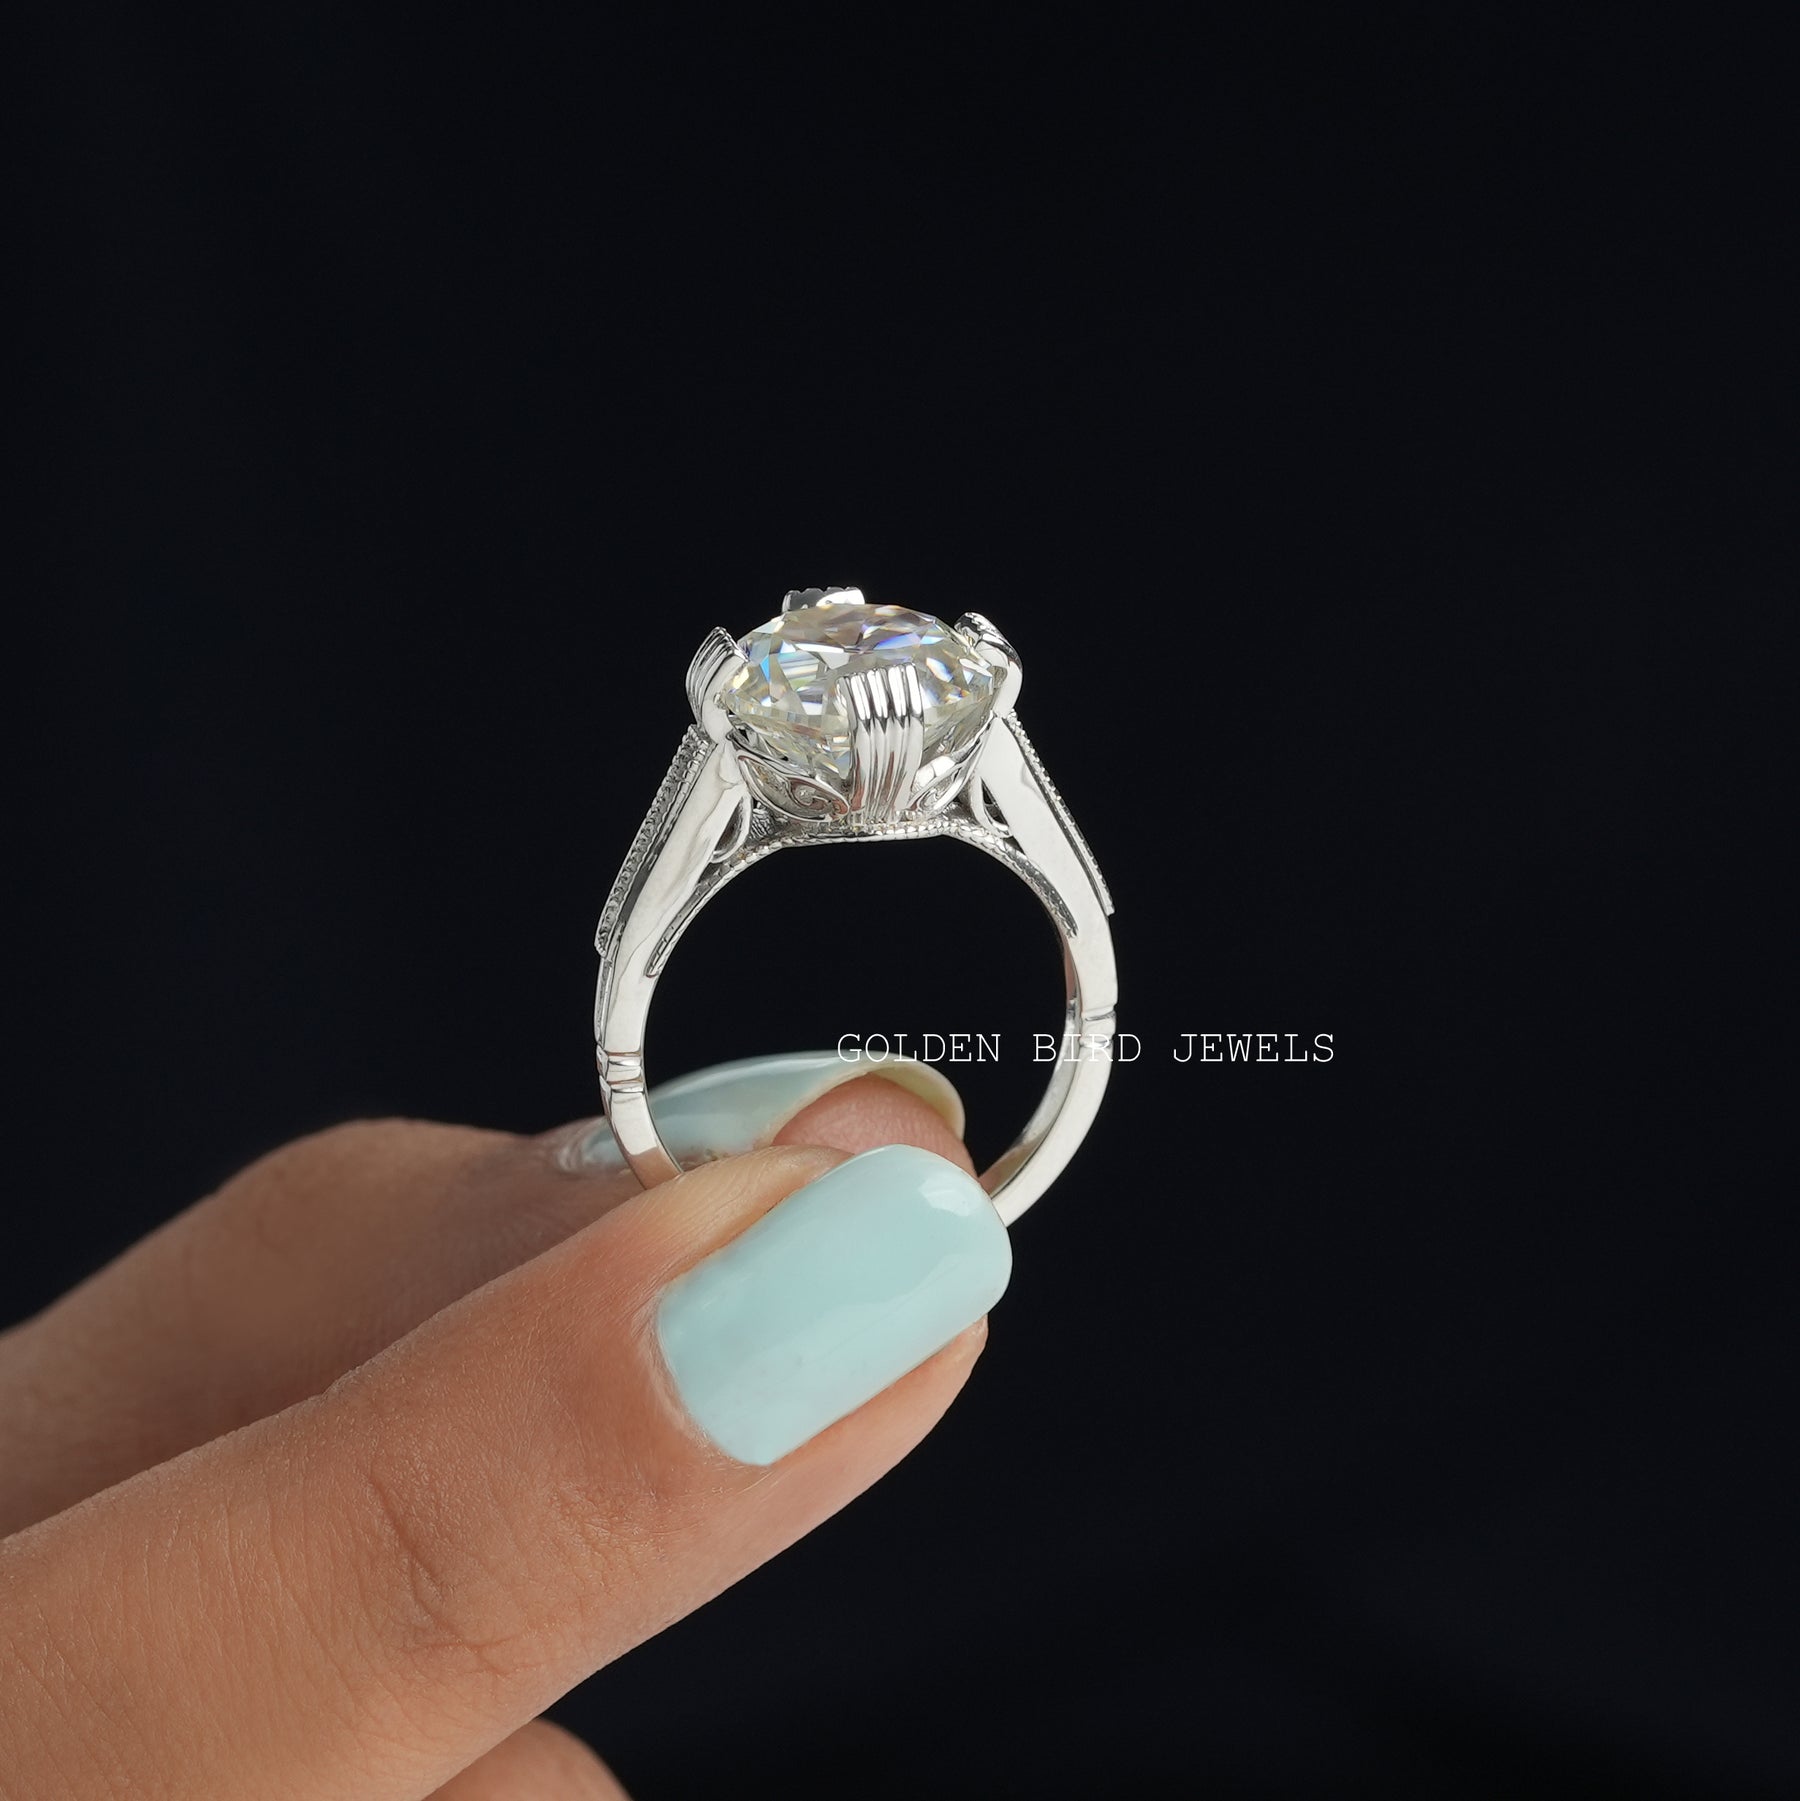 [This vintage style round cut moissanite engagement ring made in 18k white gold]-[Golden Bird Jewels]